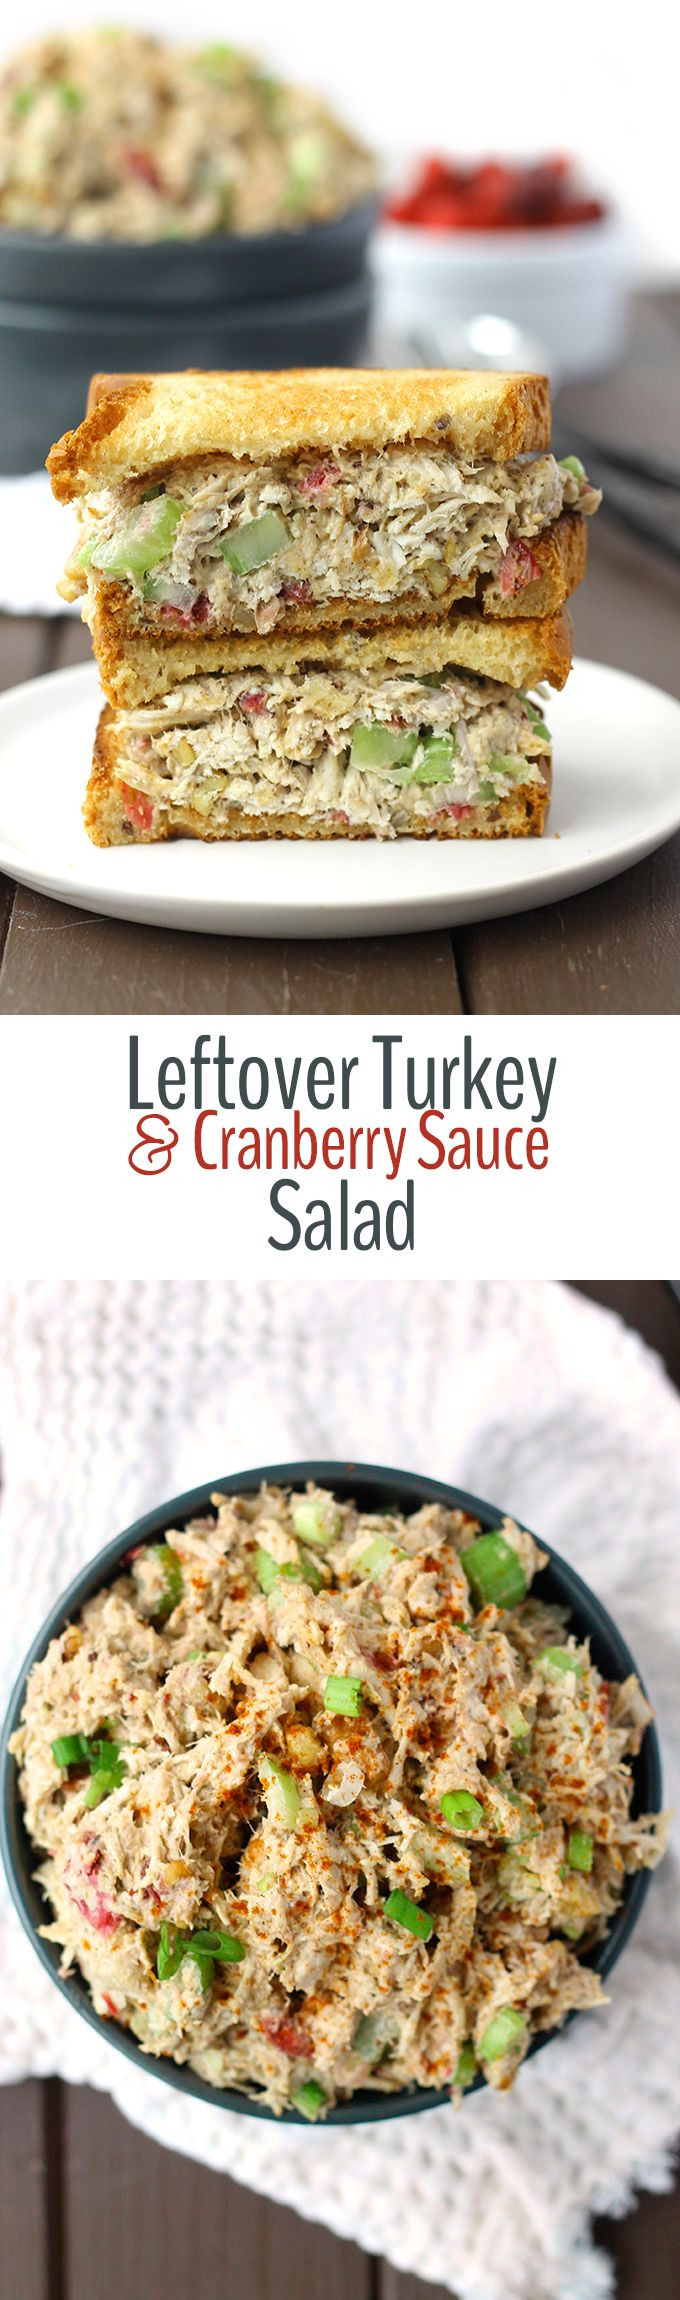 Cold Salads For Thanksgiving
 Leftover Turkey and Cranberry Sauce Salad